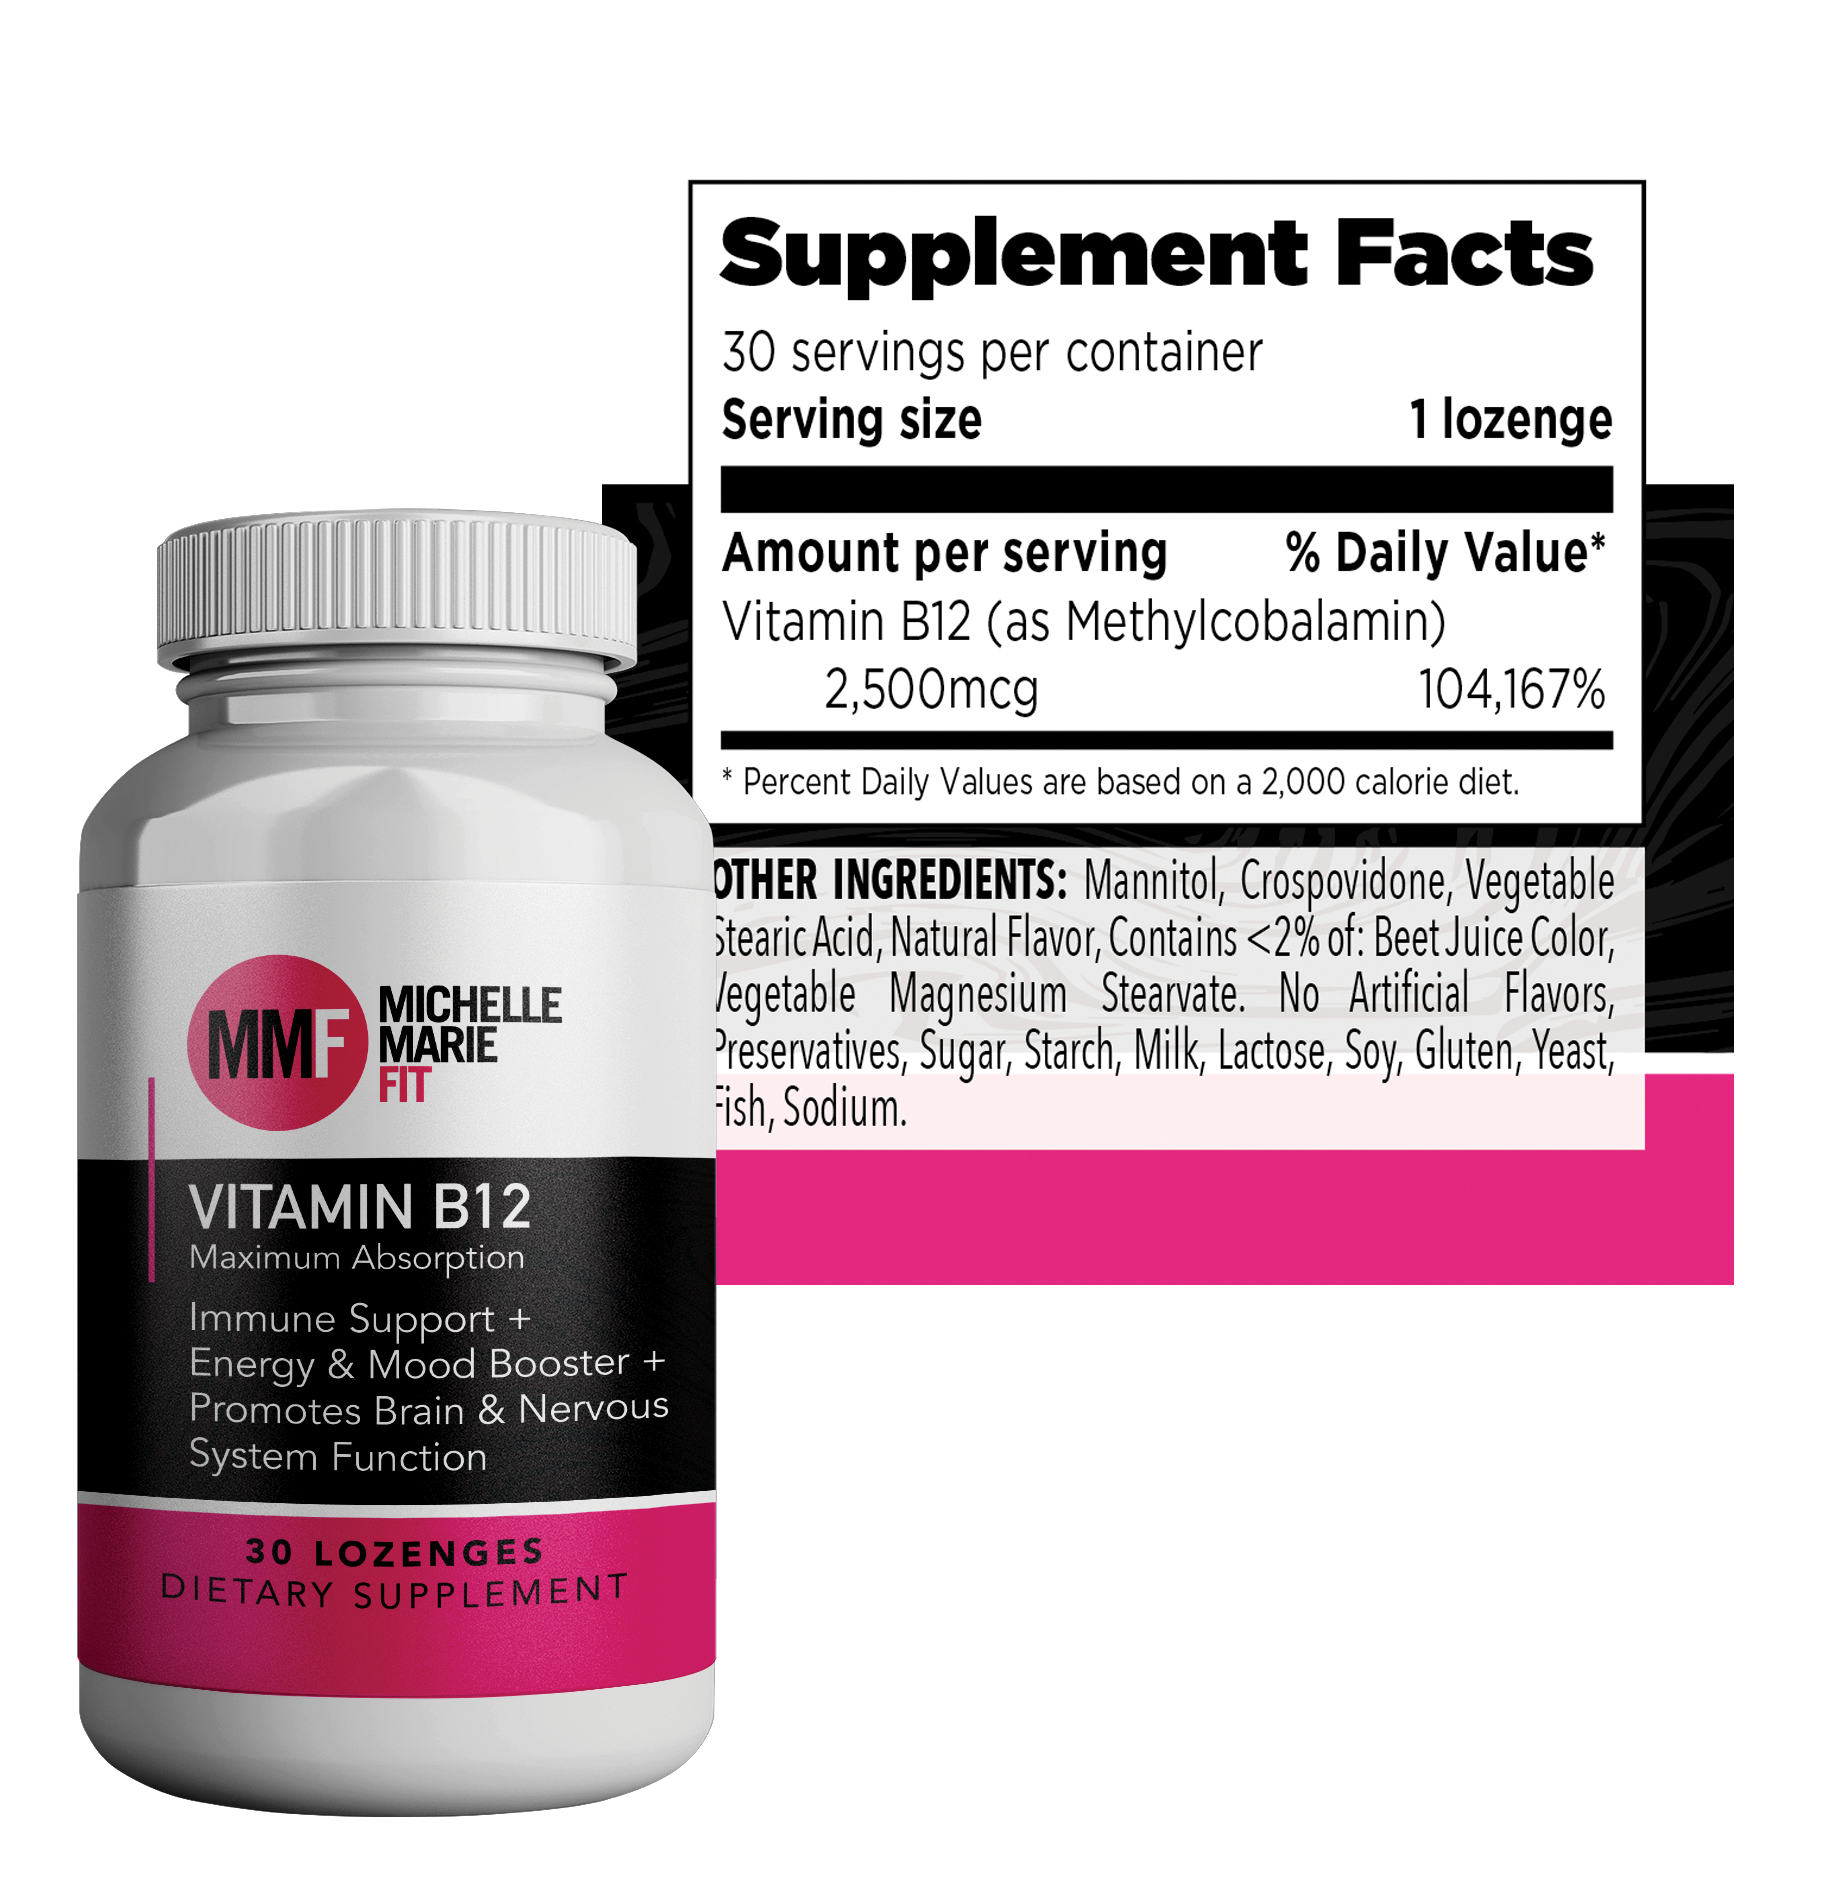 Supplement Facts For Vitamin B12